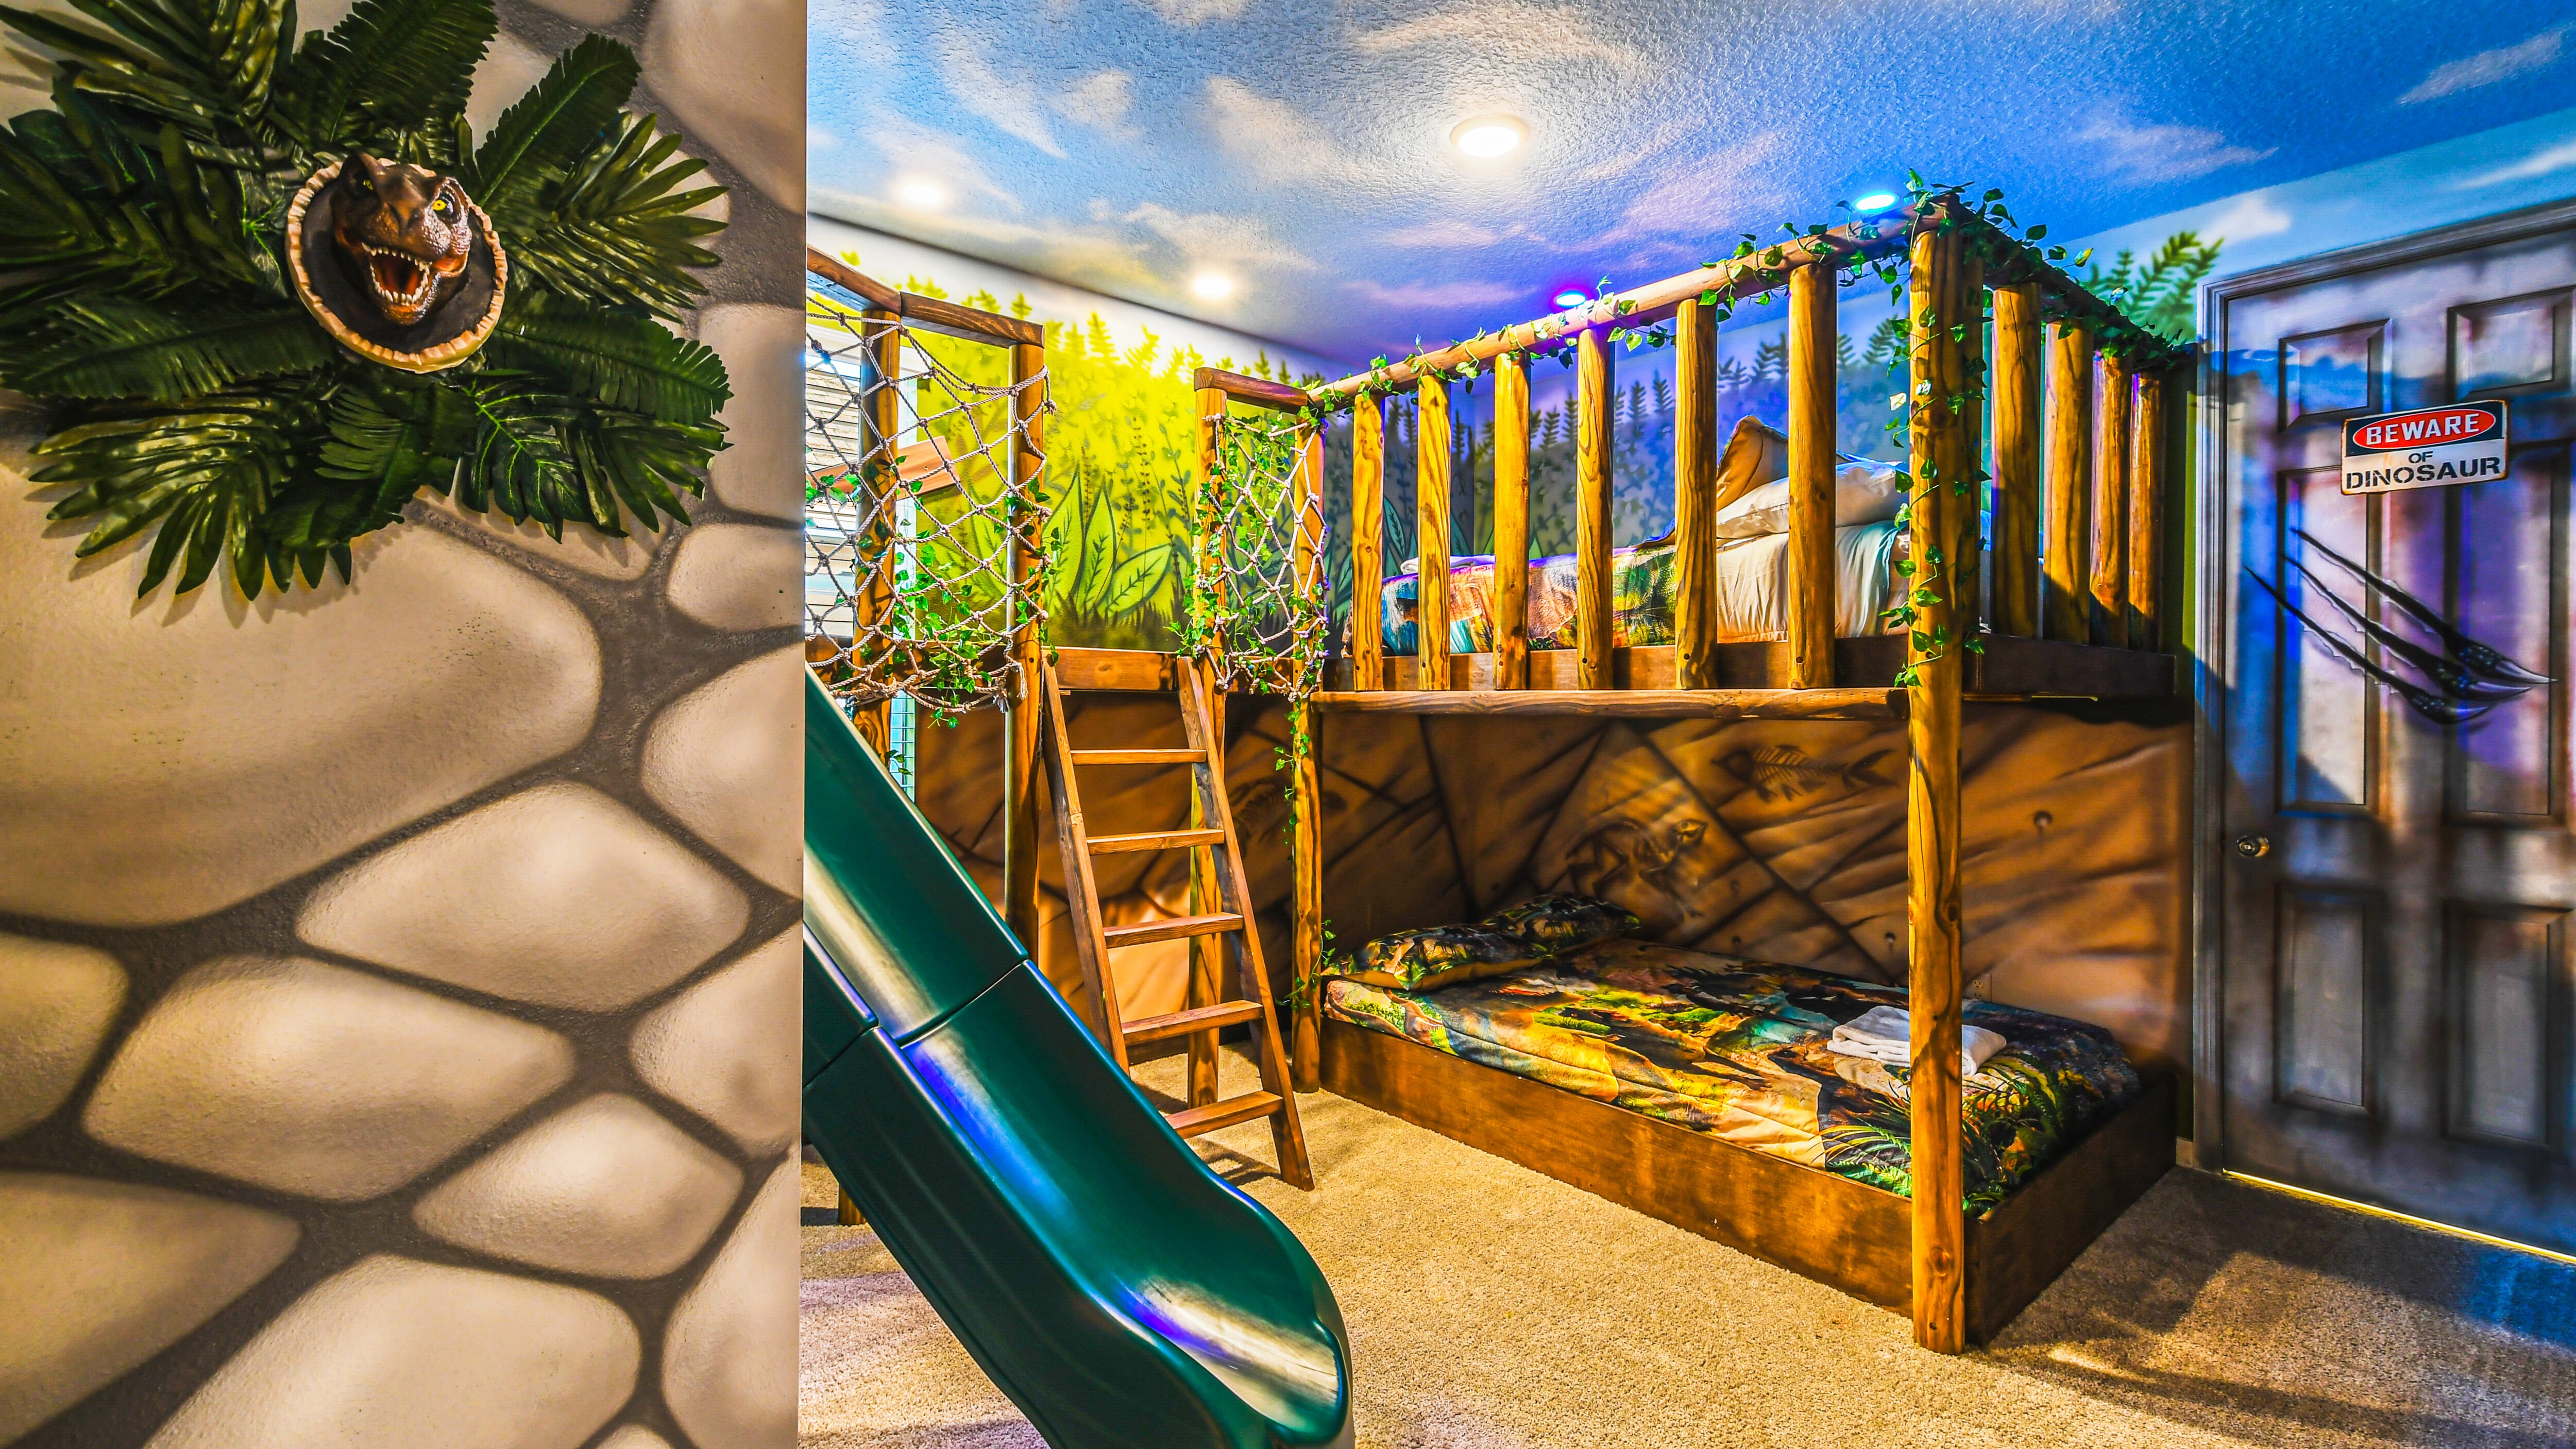 Kids will love the upstairs bedroom with a cool Jurassic theme